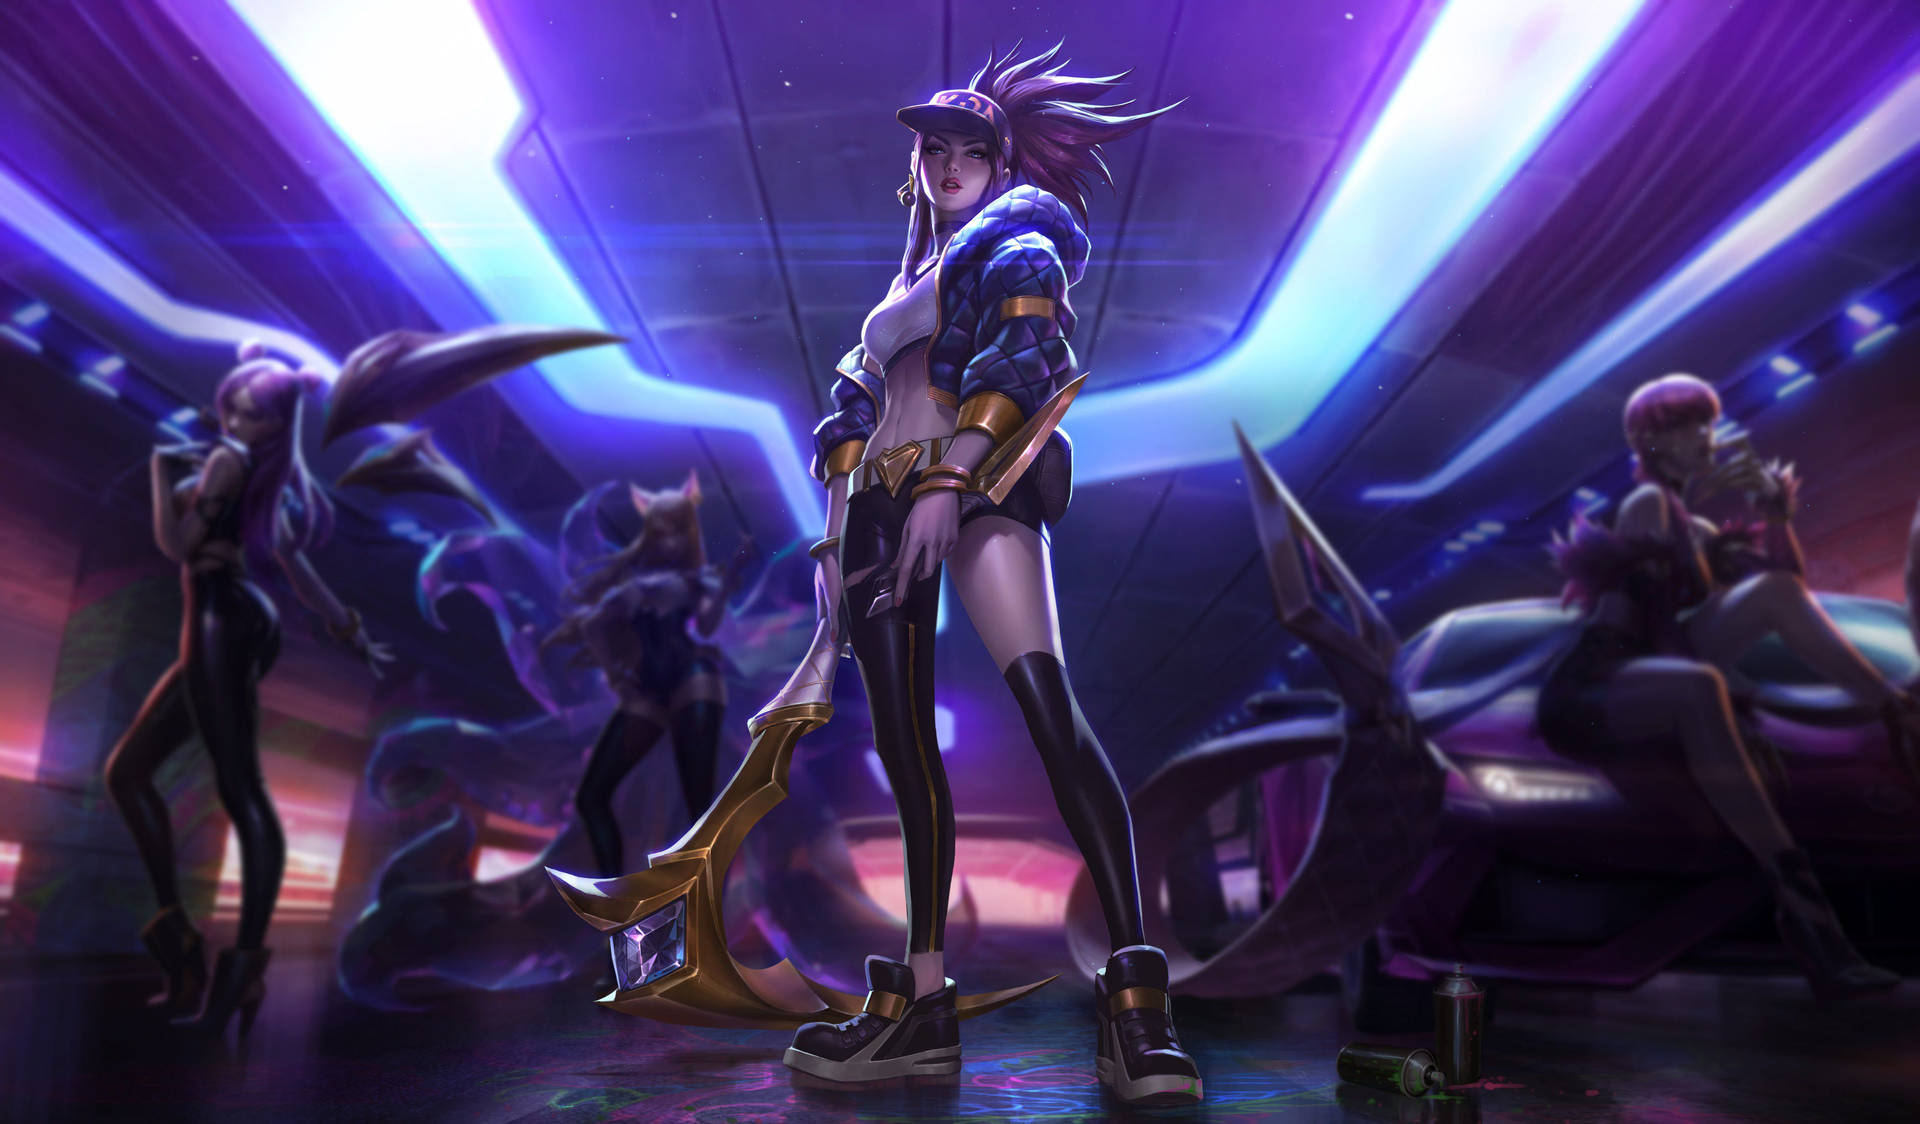 Top 999+ Kda Wallpapers Full HD, 4K✅Free to Use